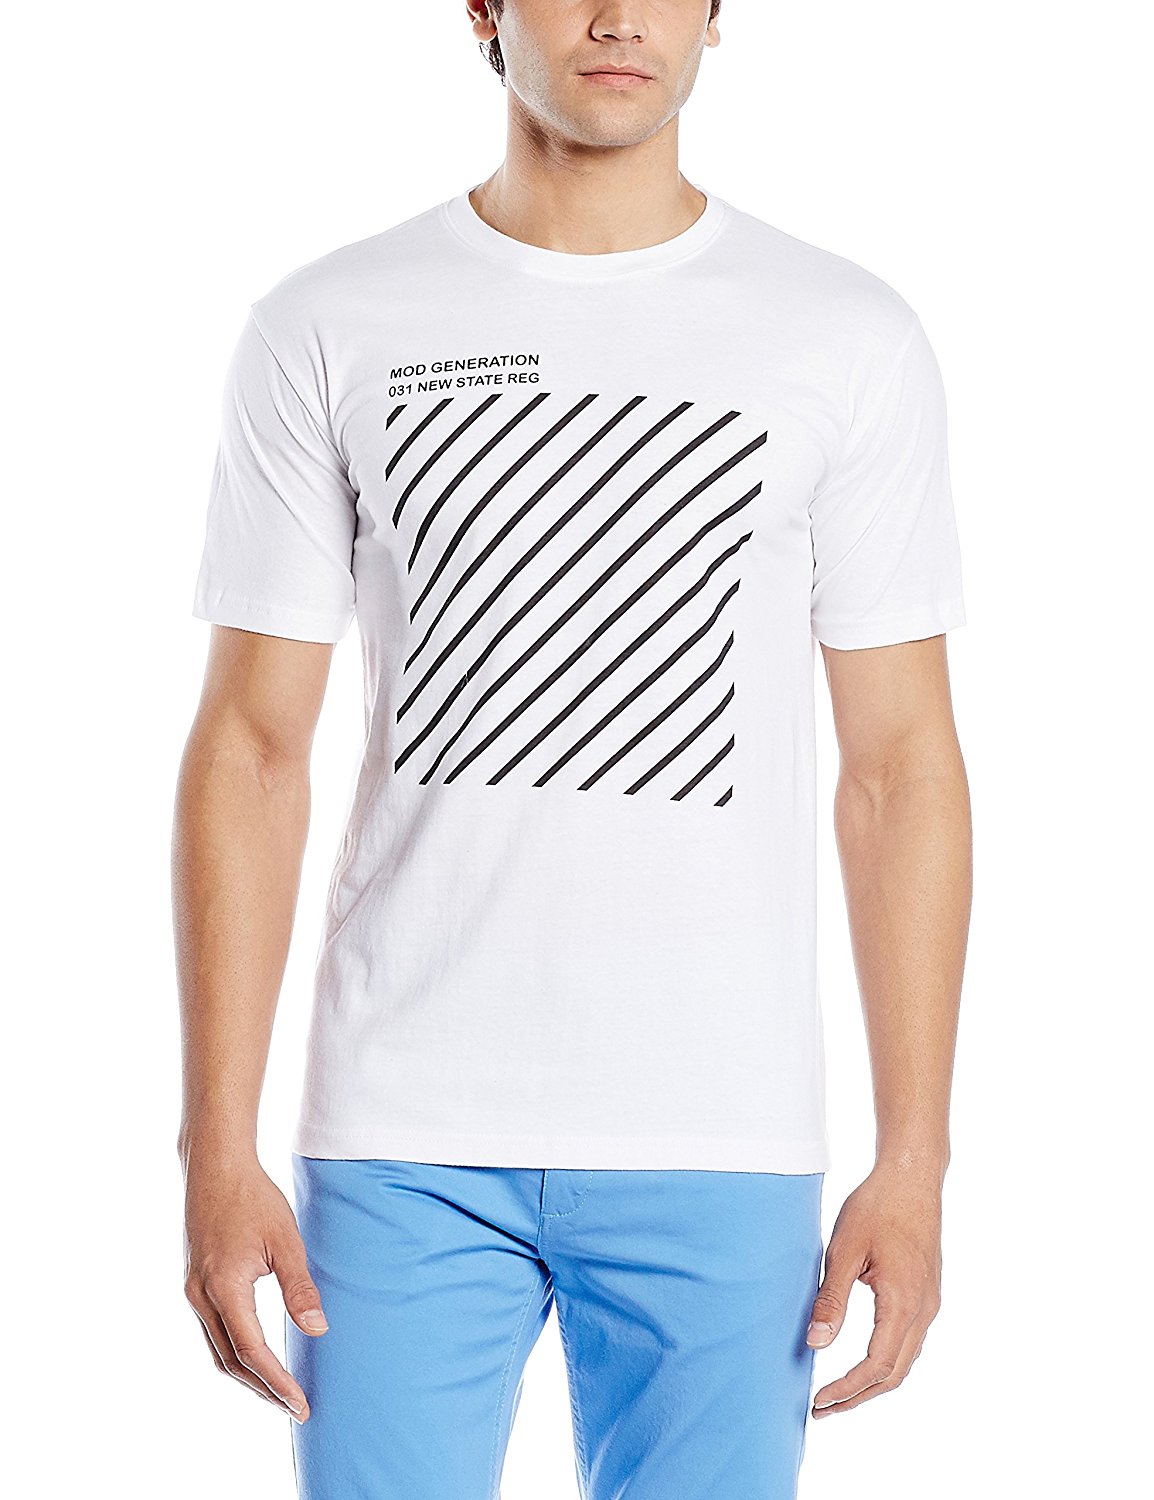 (Loot)Amazon - Flat 50% Off on Men's T-Shirt Starting At Rs 150